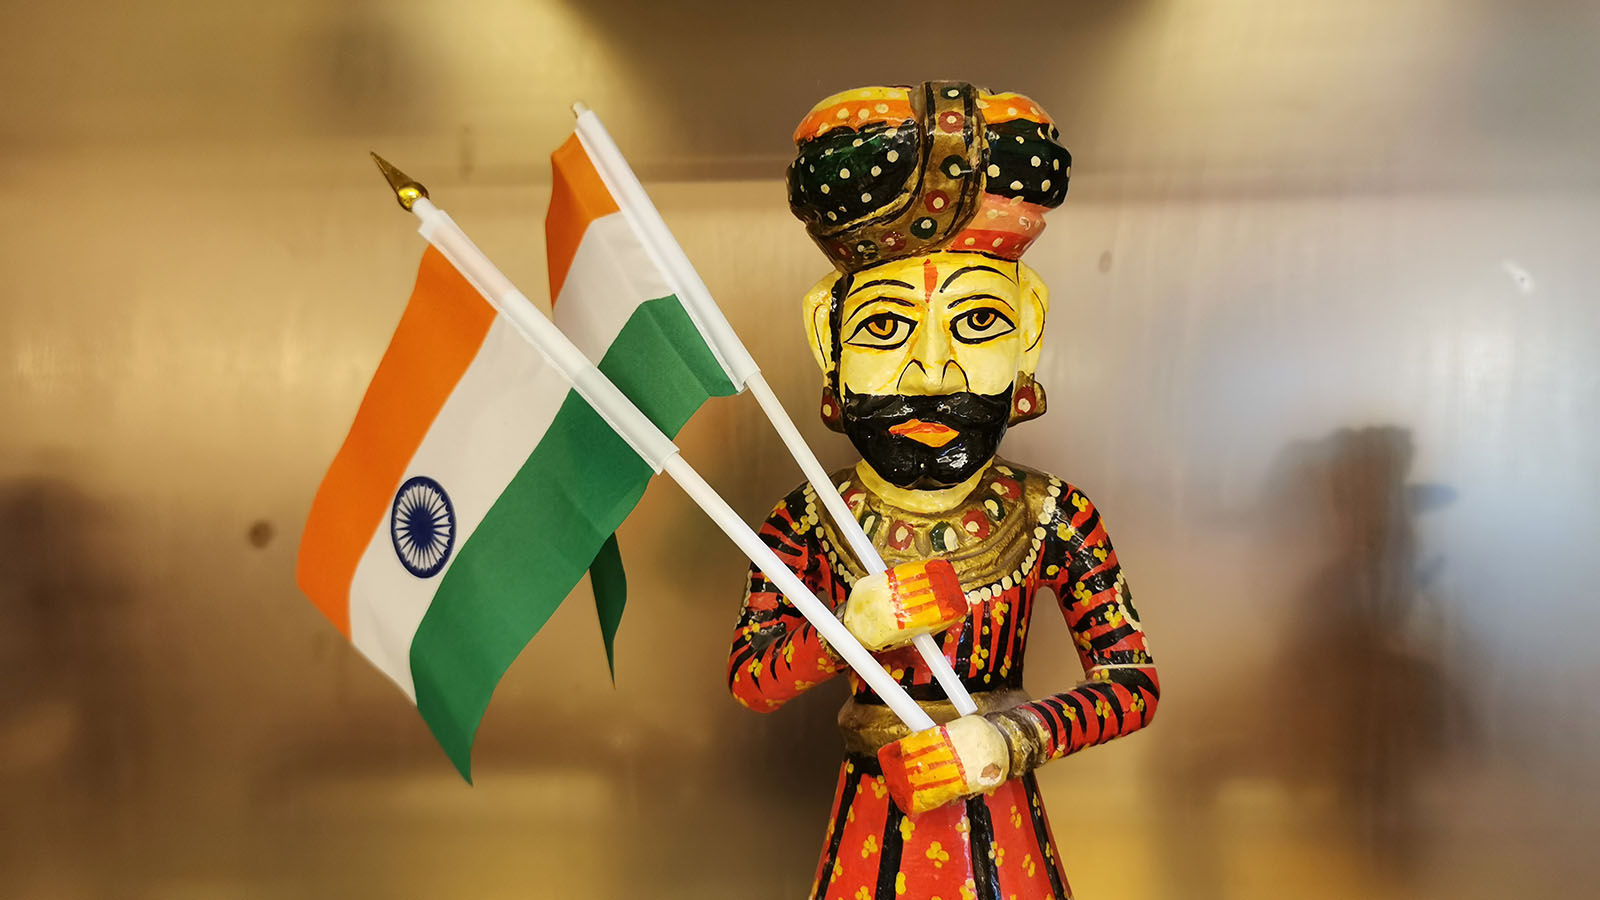 Figurine at Air India's Business Class lounge in Delhi